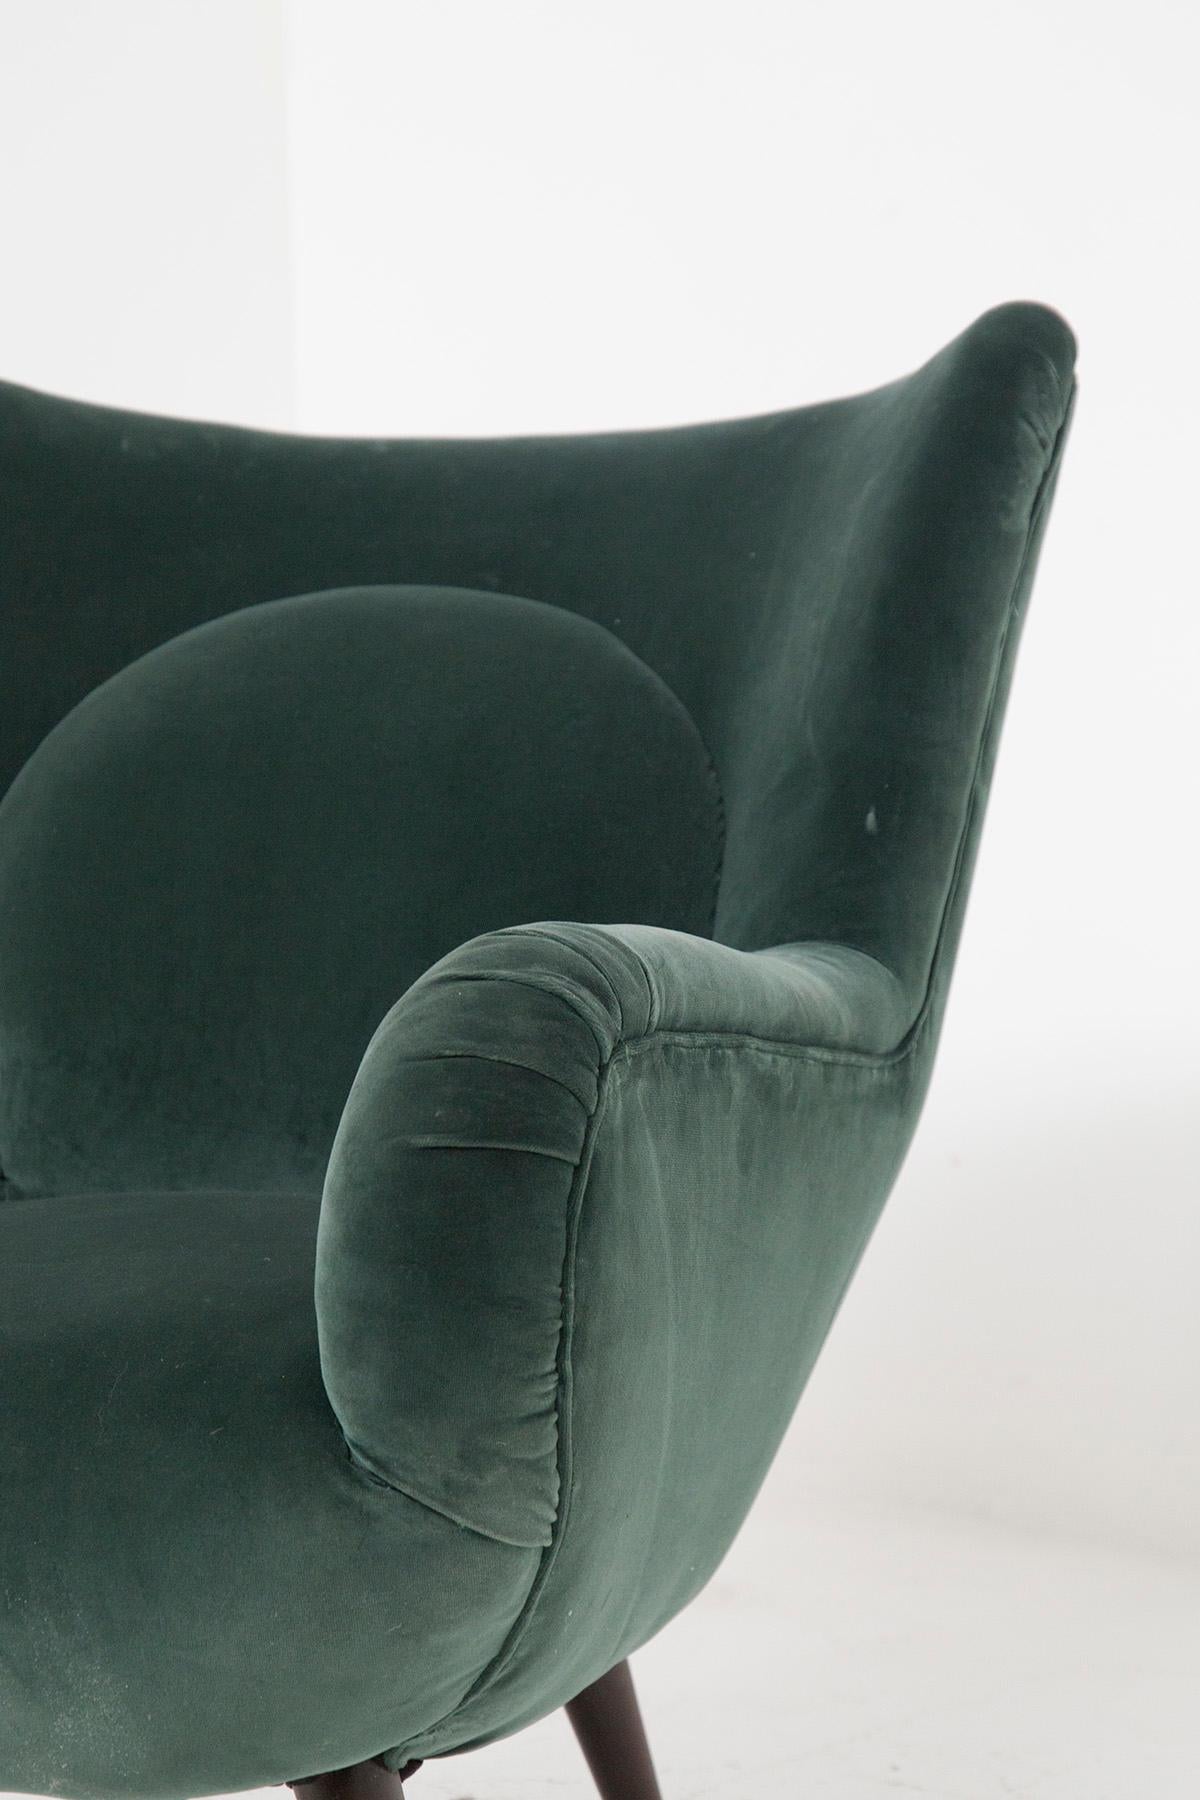 In the enchanting world of Italian design, there is a true masterpiece: a rare velvet armchair created by the famous designer Carlo Mollino in the glamorous 1950s. This precious piece bears the unmistakable mark of Italian craftsmanship, which bears